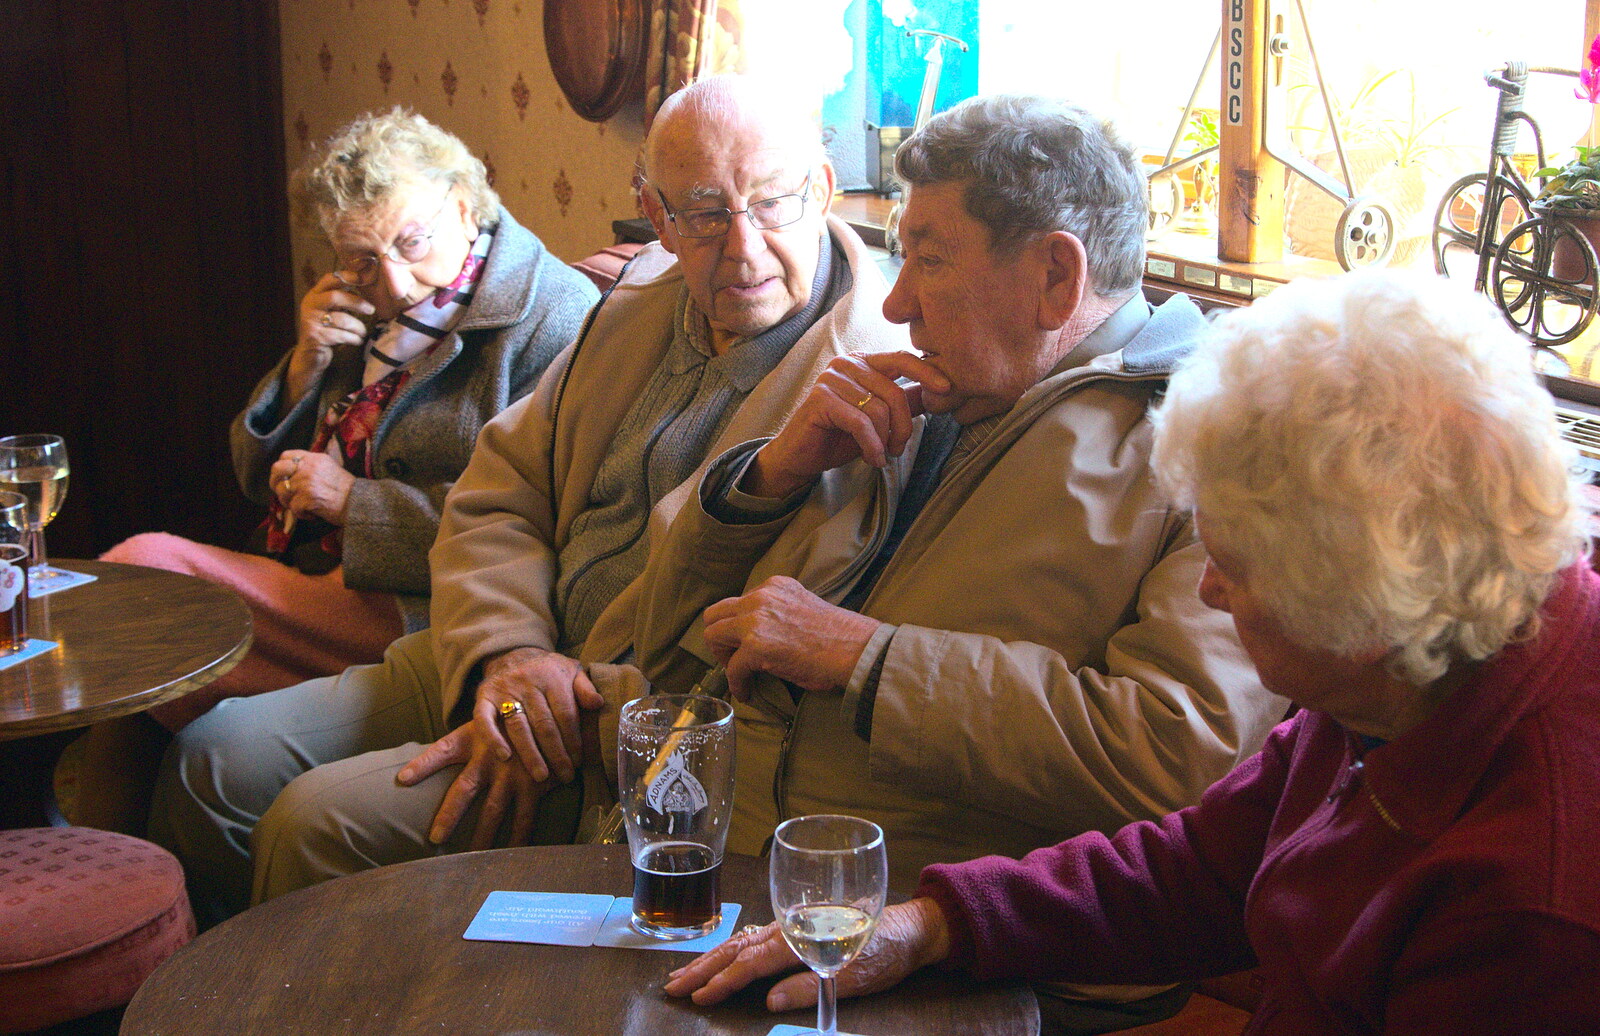 John Lummis chats to someone from A Trip to Norwich, and Beers at The Swan Inn, Brome, Suffolk - 5th January 2015